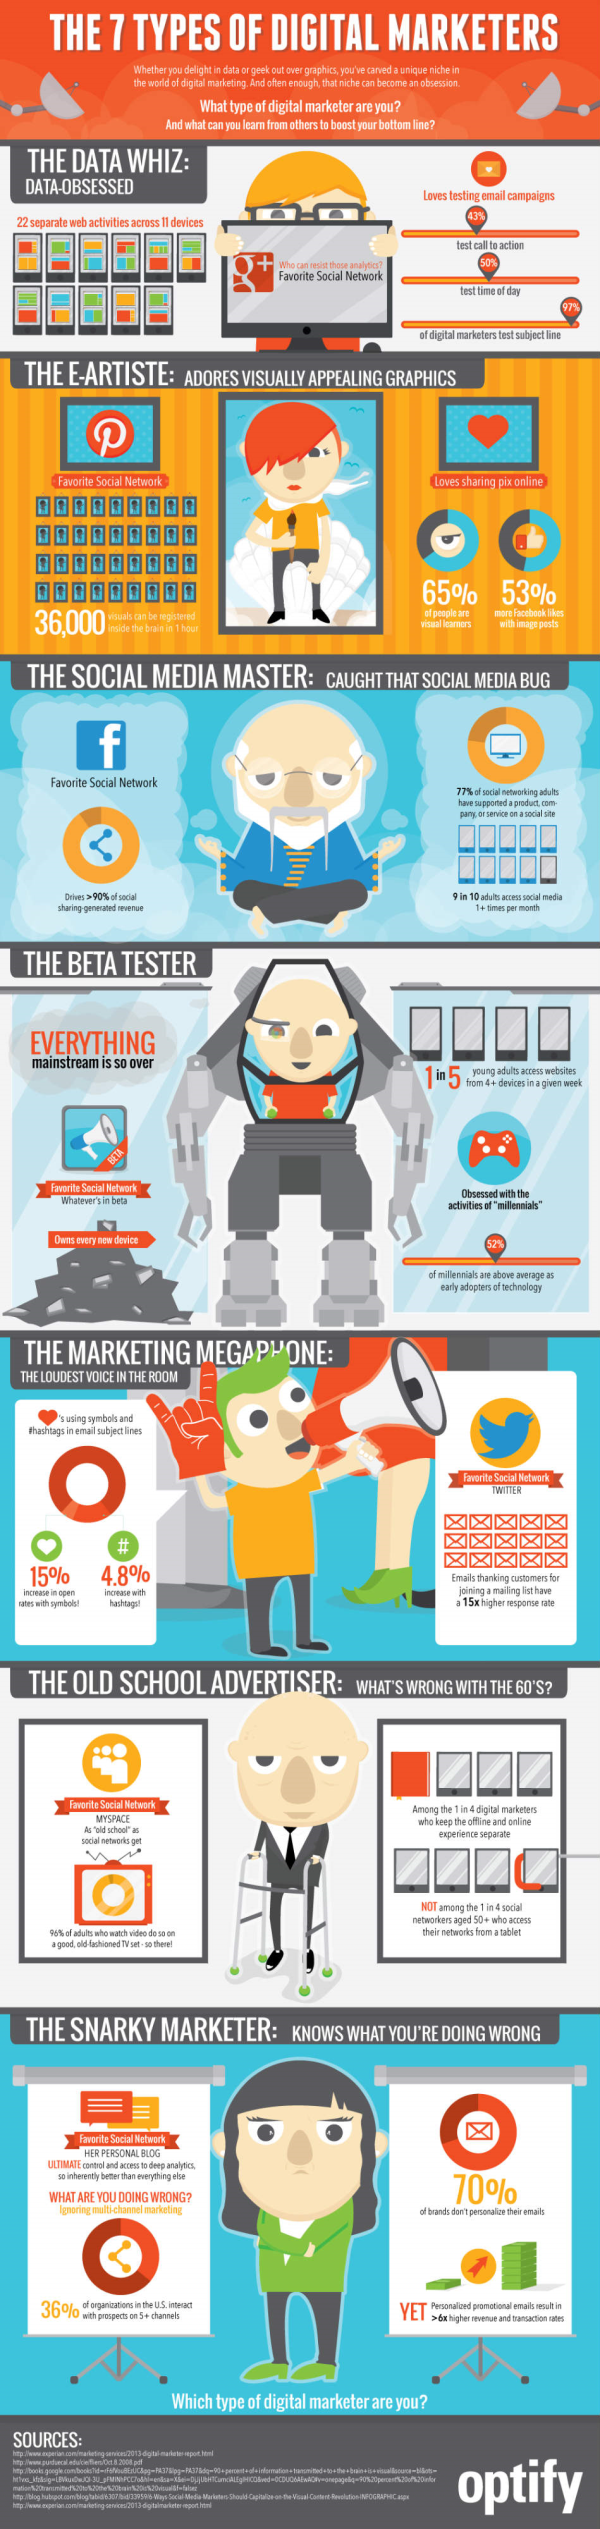 The 7 types of digital marketers resized 600